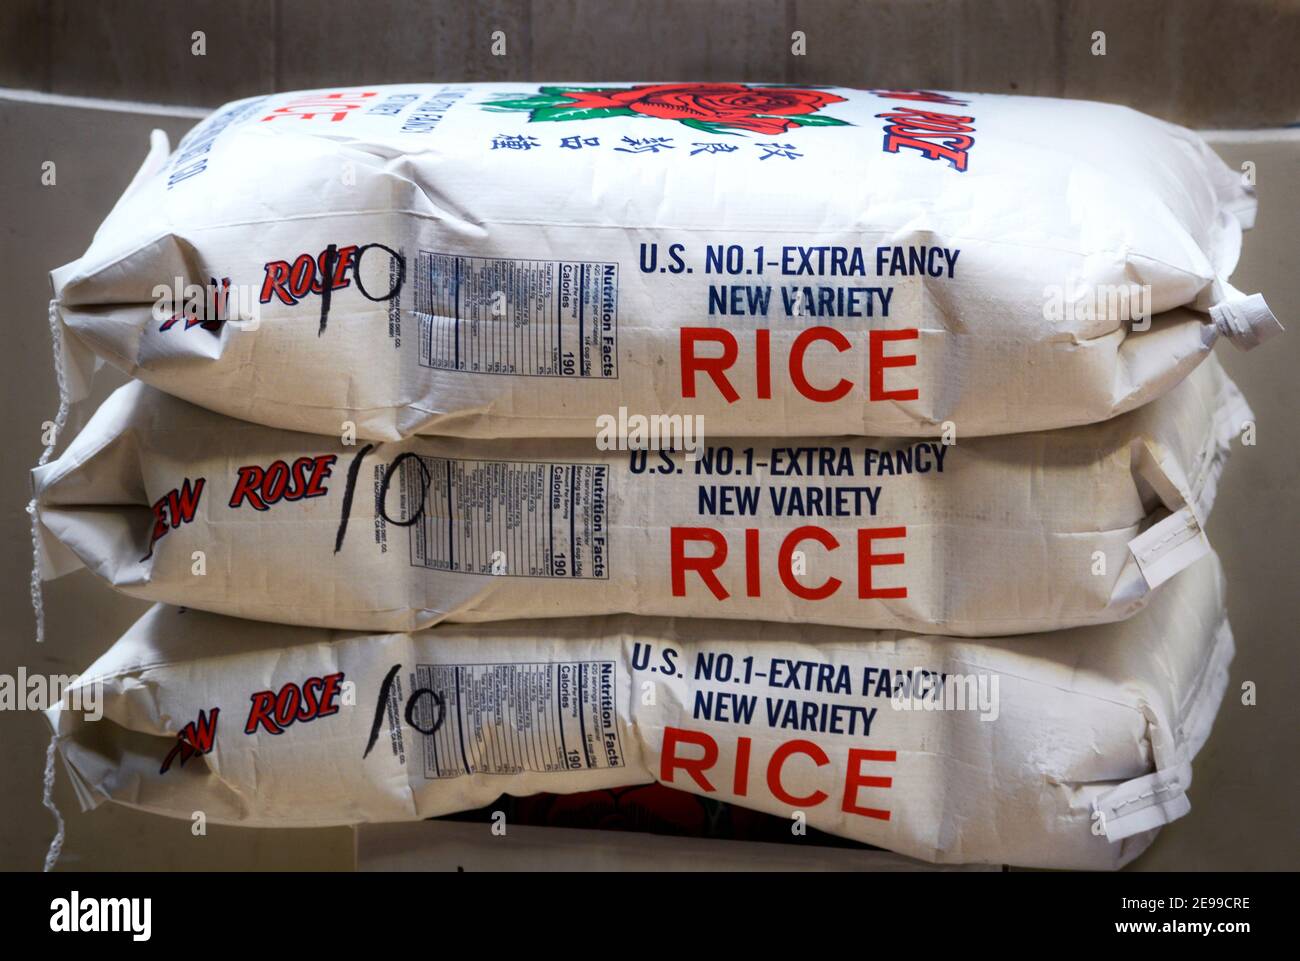 Bags of U.S.-grown New Rose brand rice outside a Japanese restaurant in the Japantown area of San Francisco, California. Stock Photo